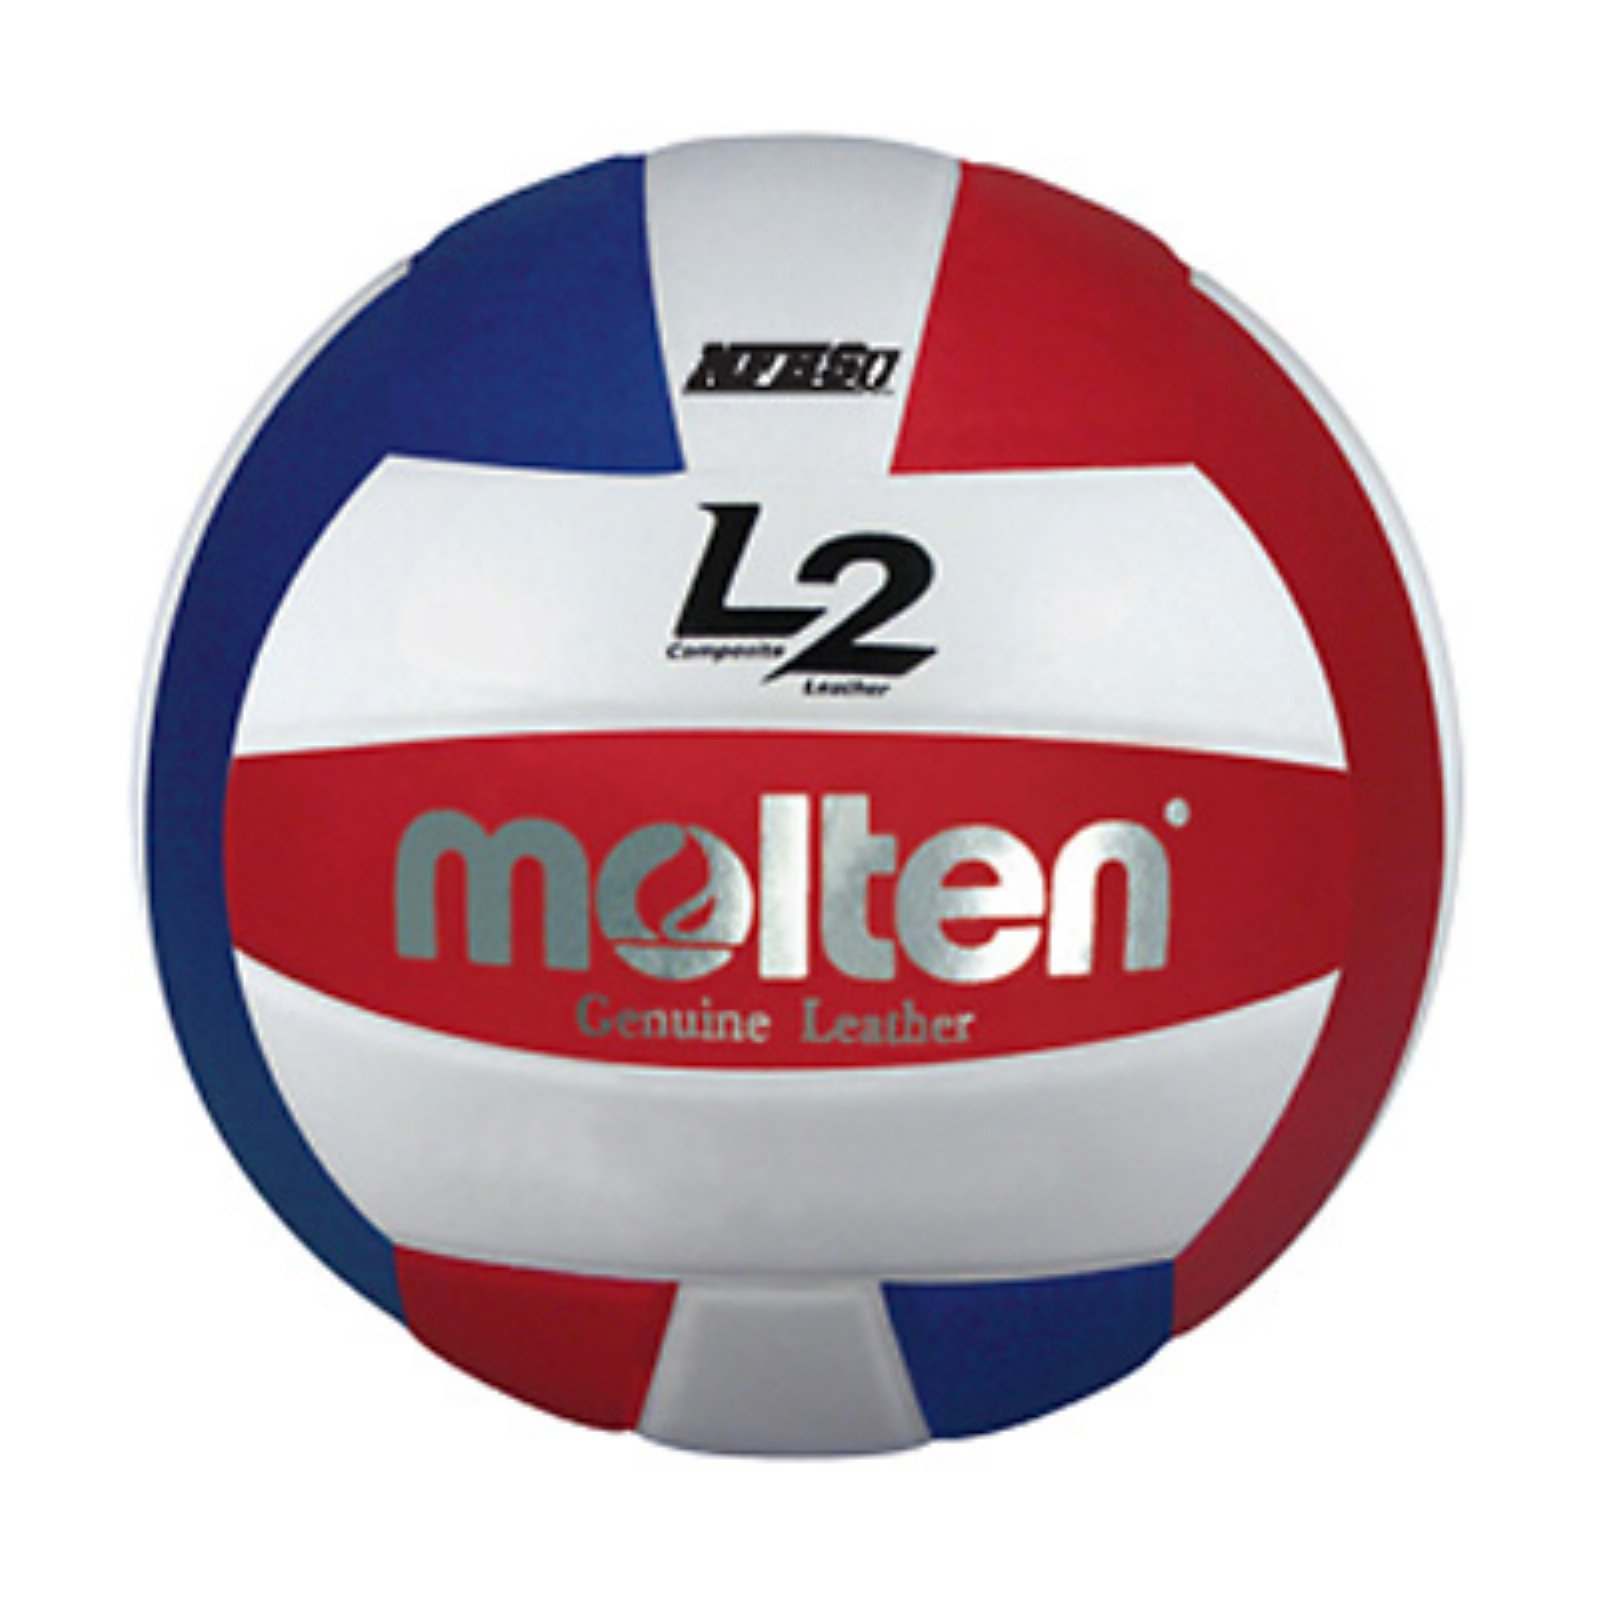 Molten L2 Series NFHS Approved Volleyball - image 2 of 2